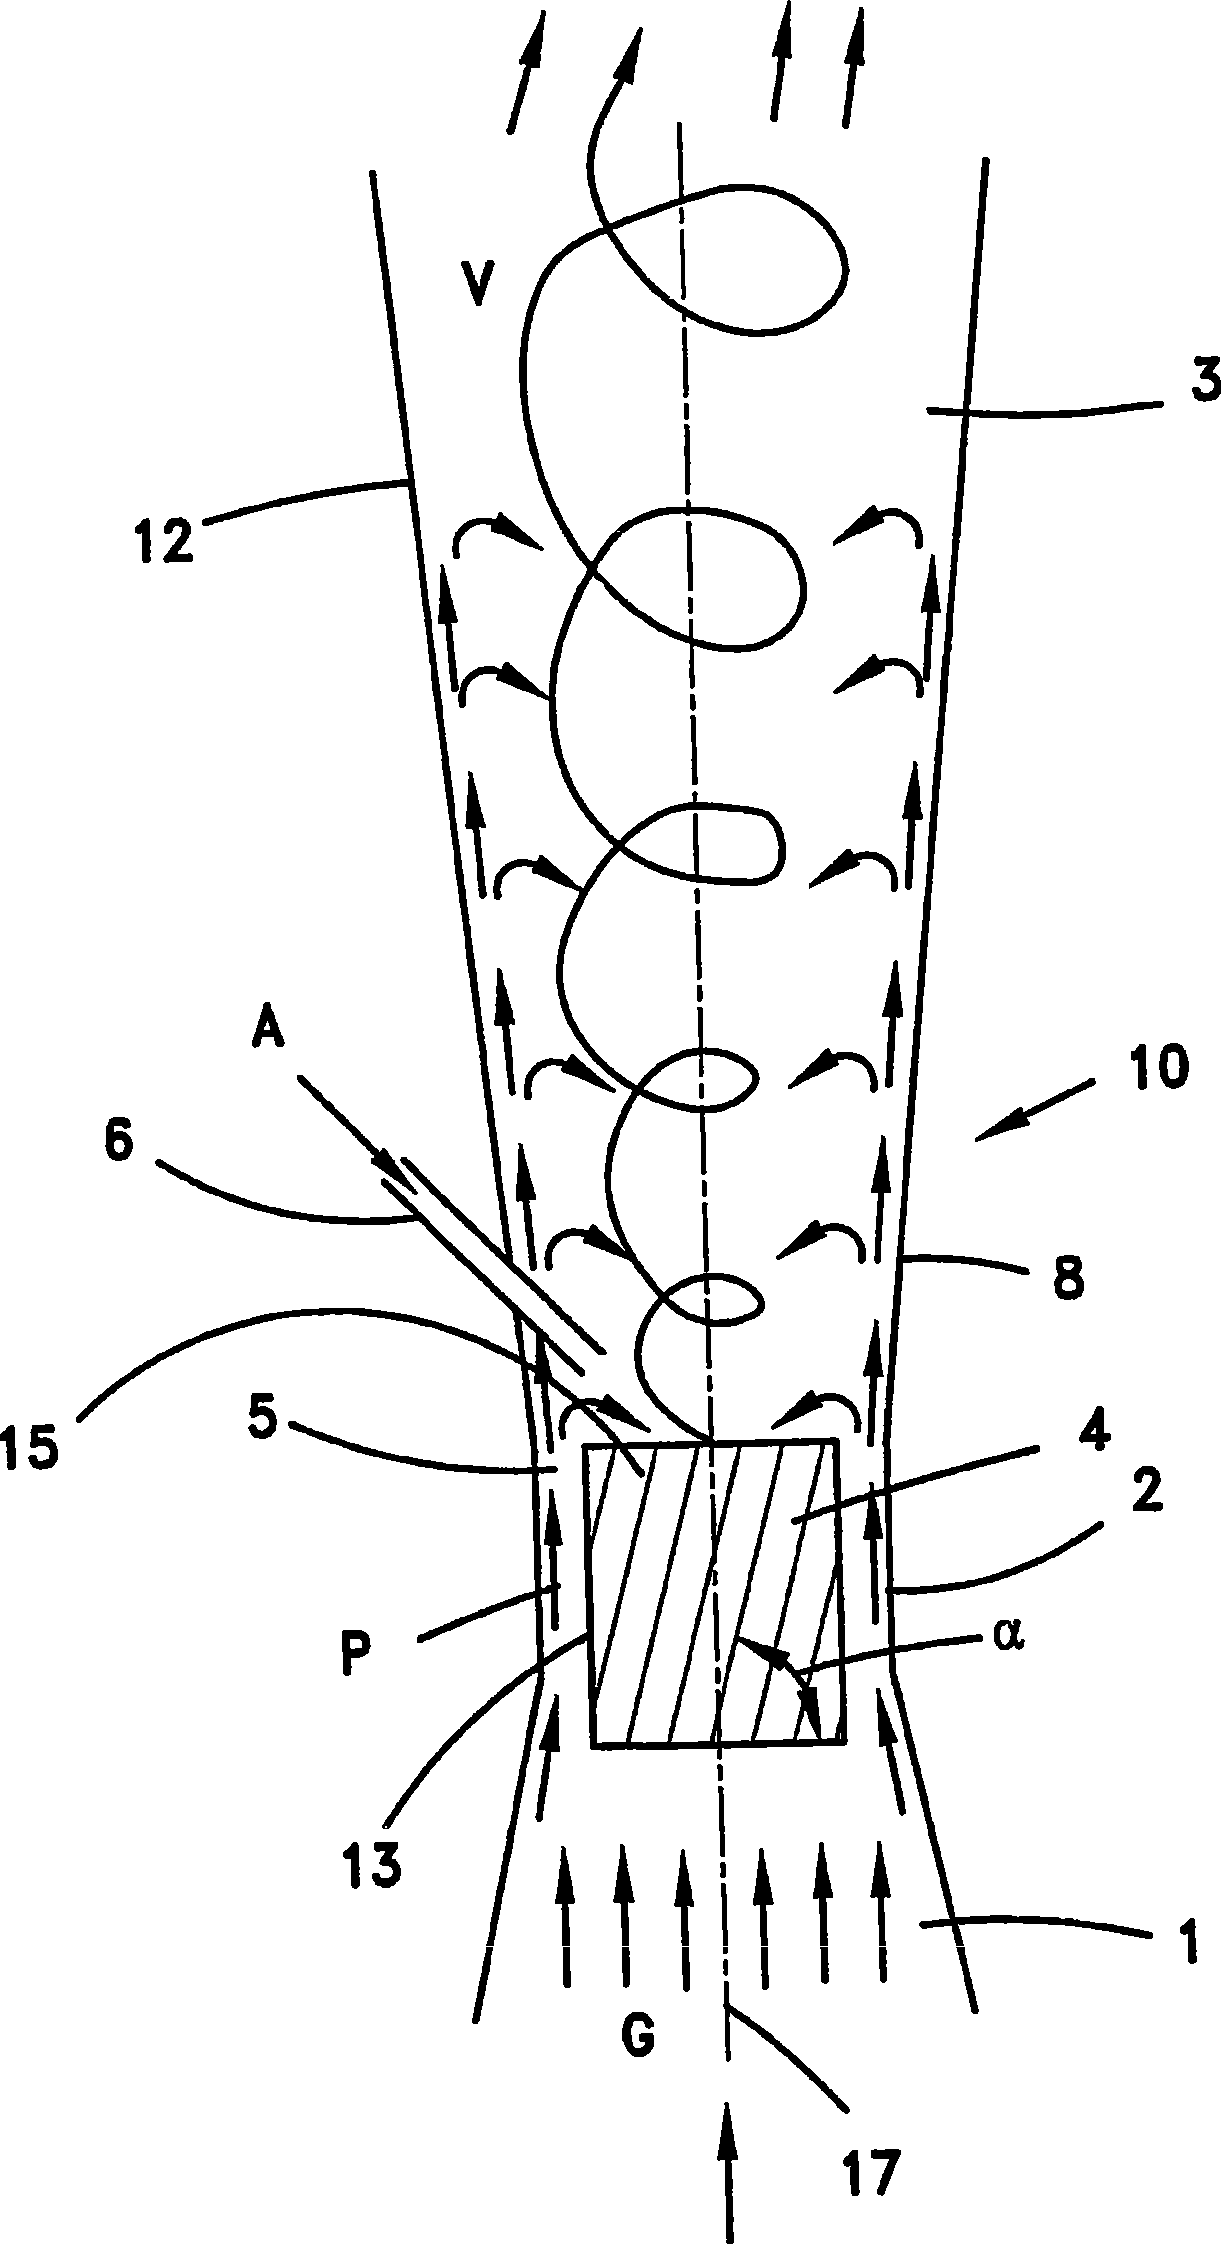 Apparatus and method for the removal of gaseous pollutants from an upwardly flowing gas stream